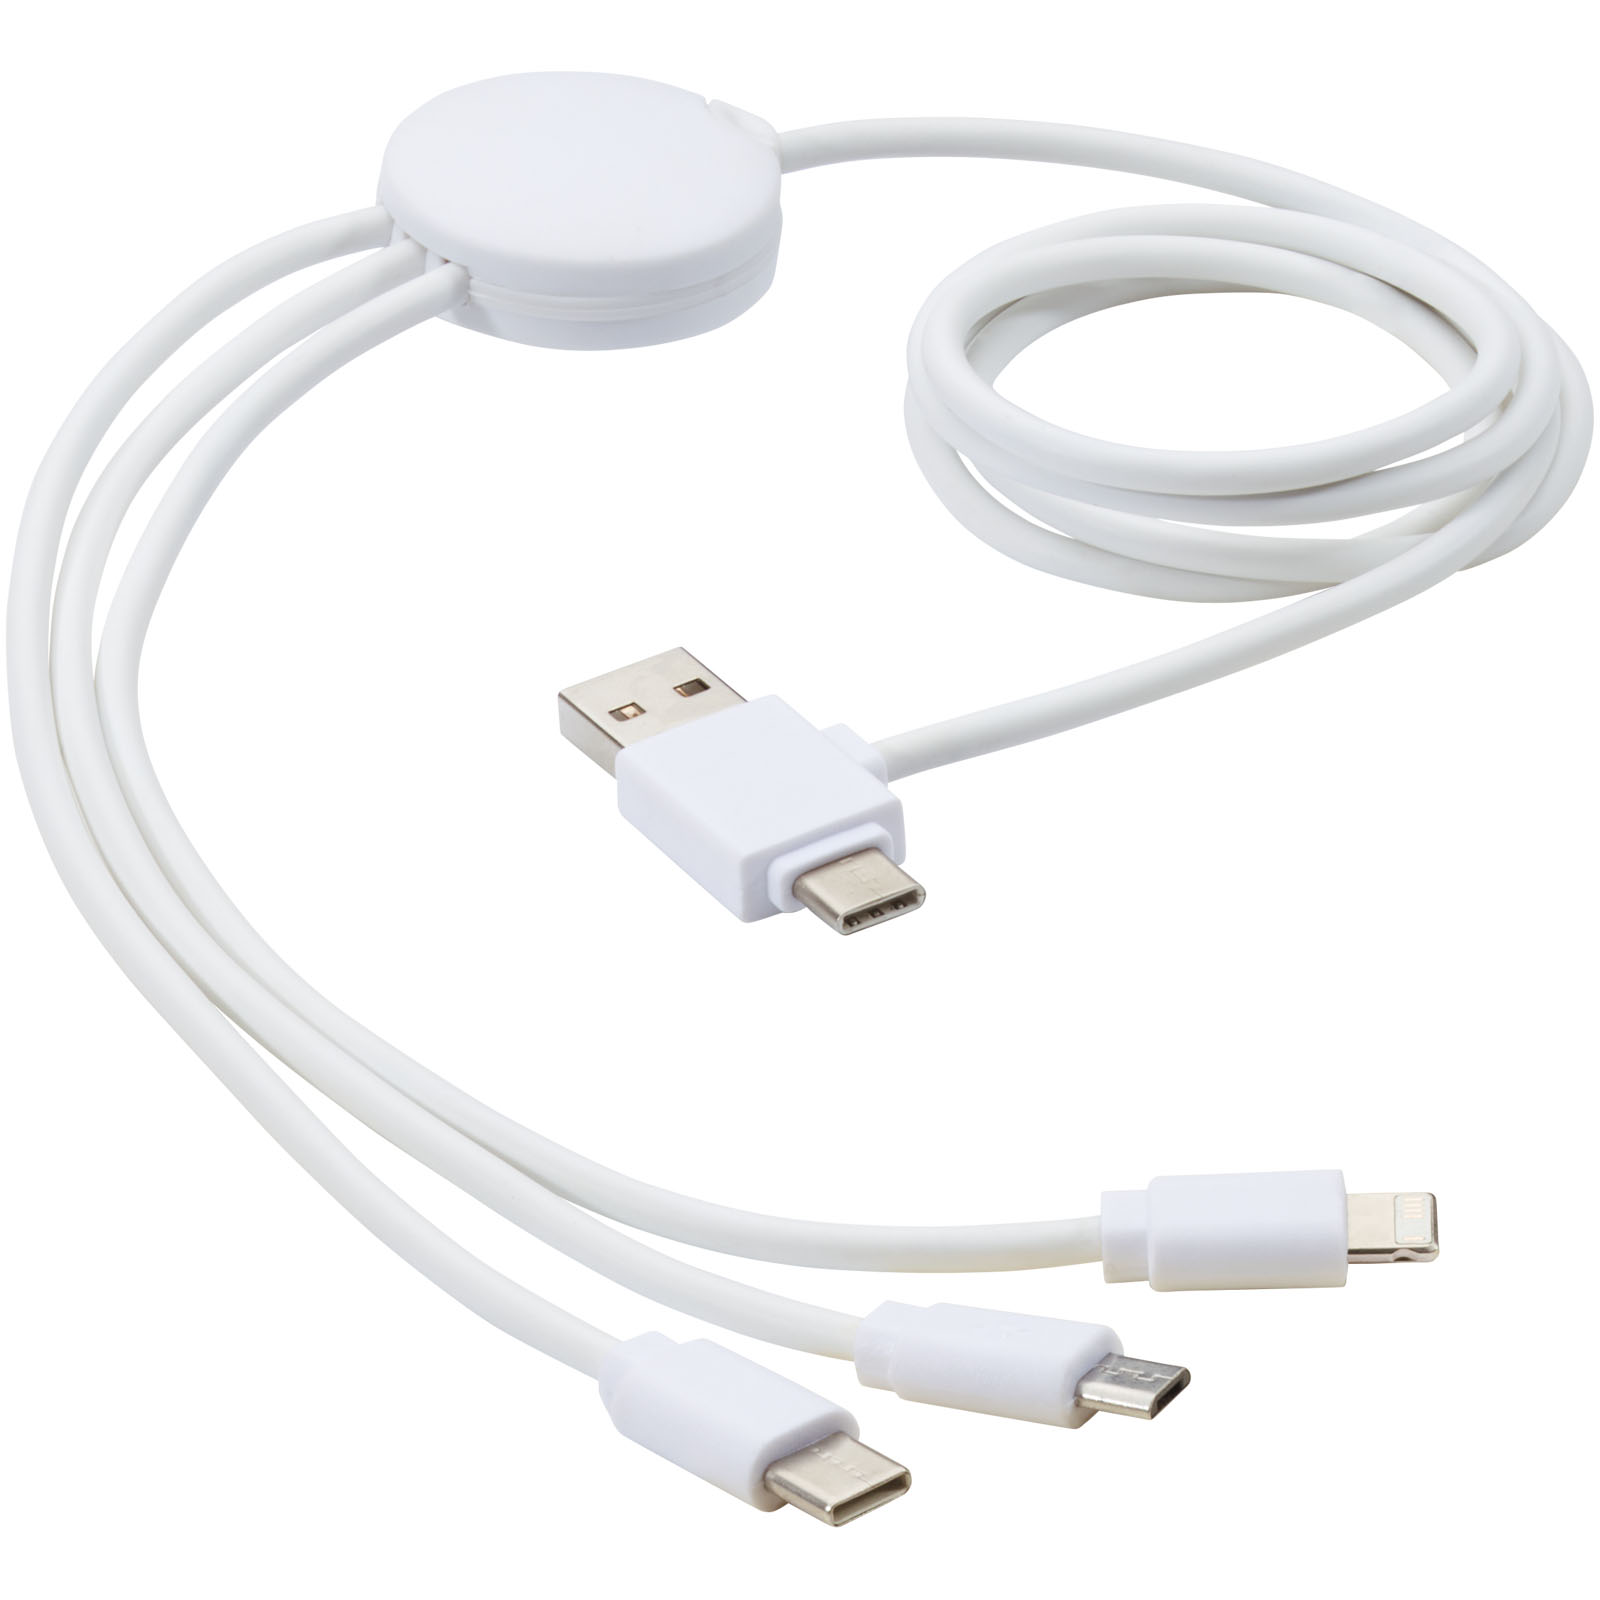 Technology - Pure 5-in-1 charging cable with antibacterial additive